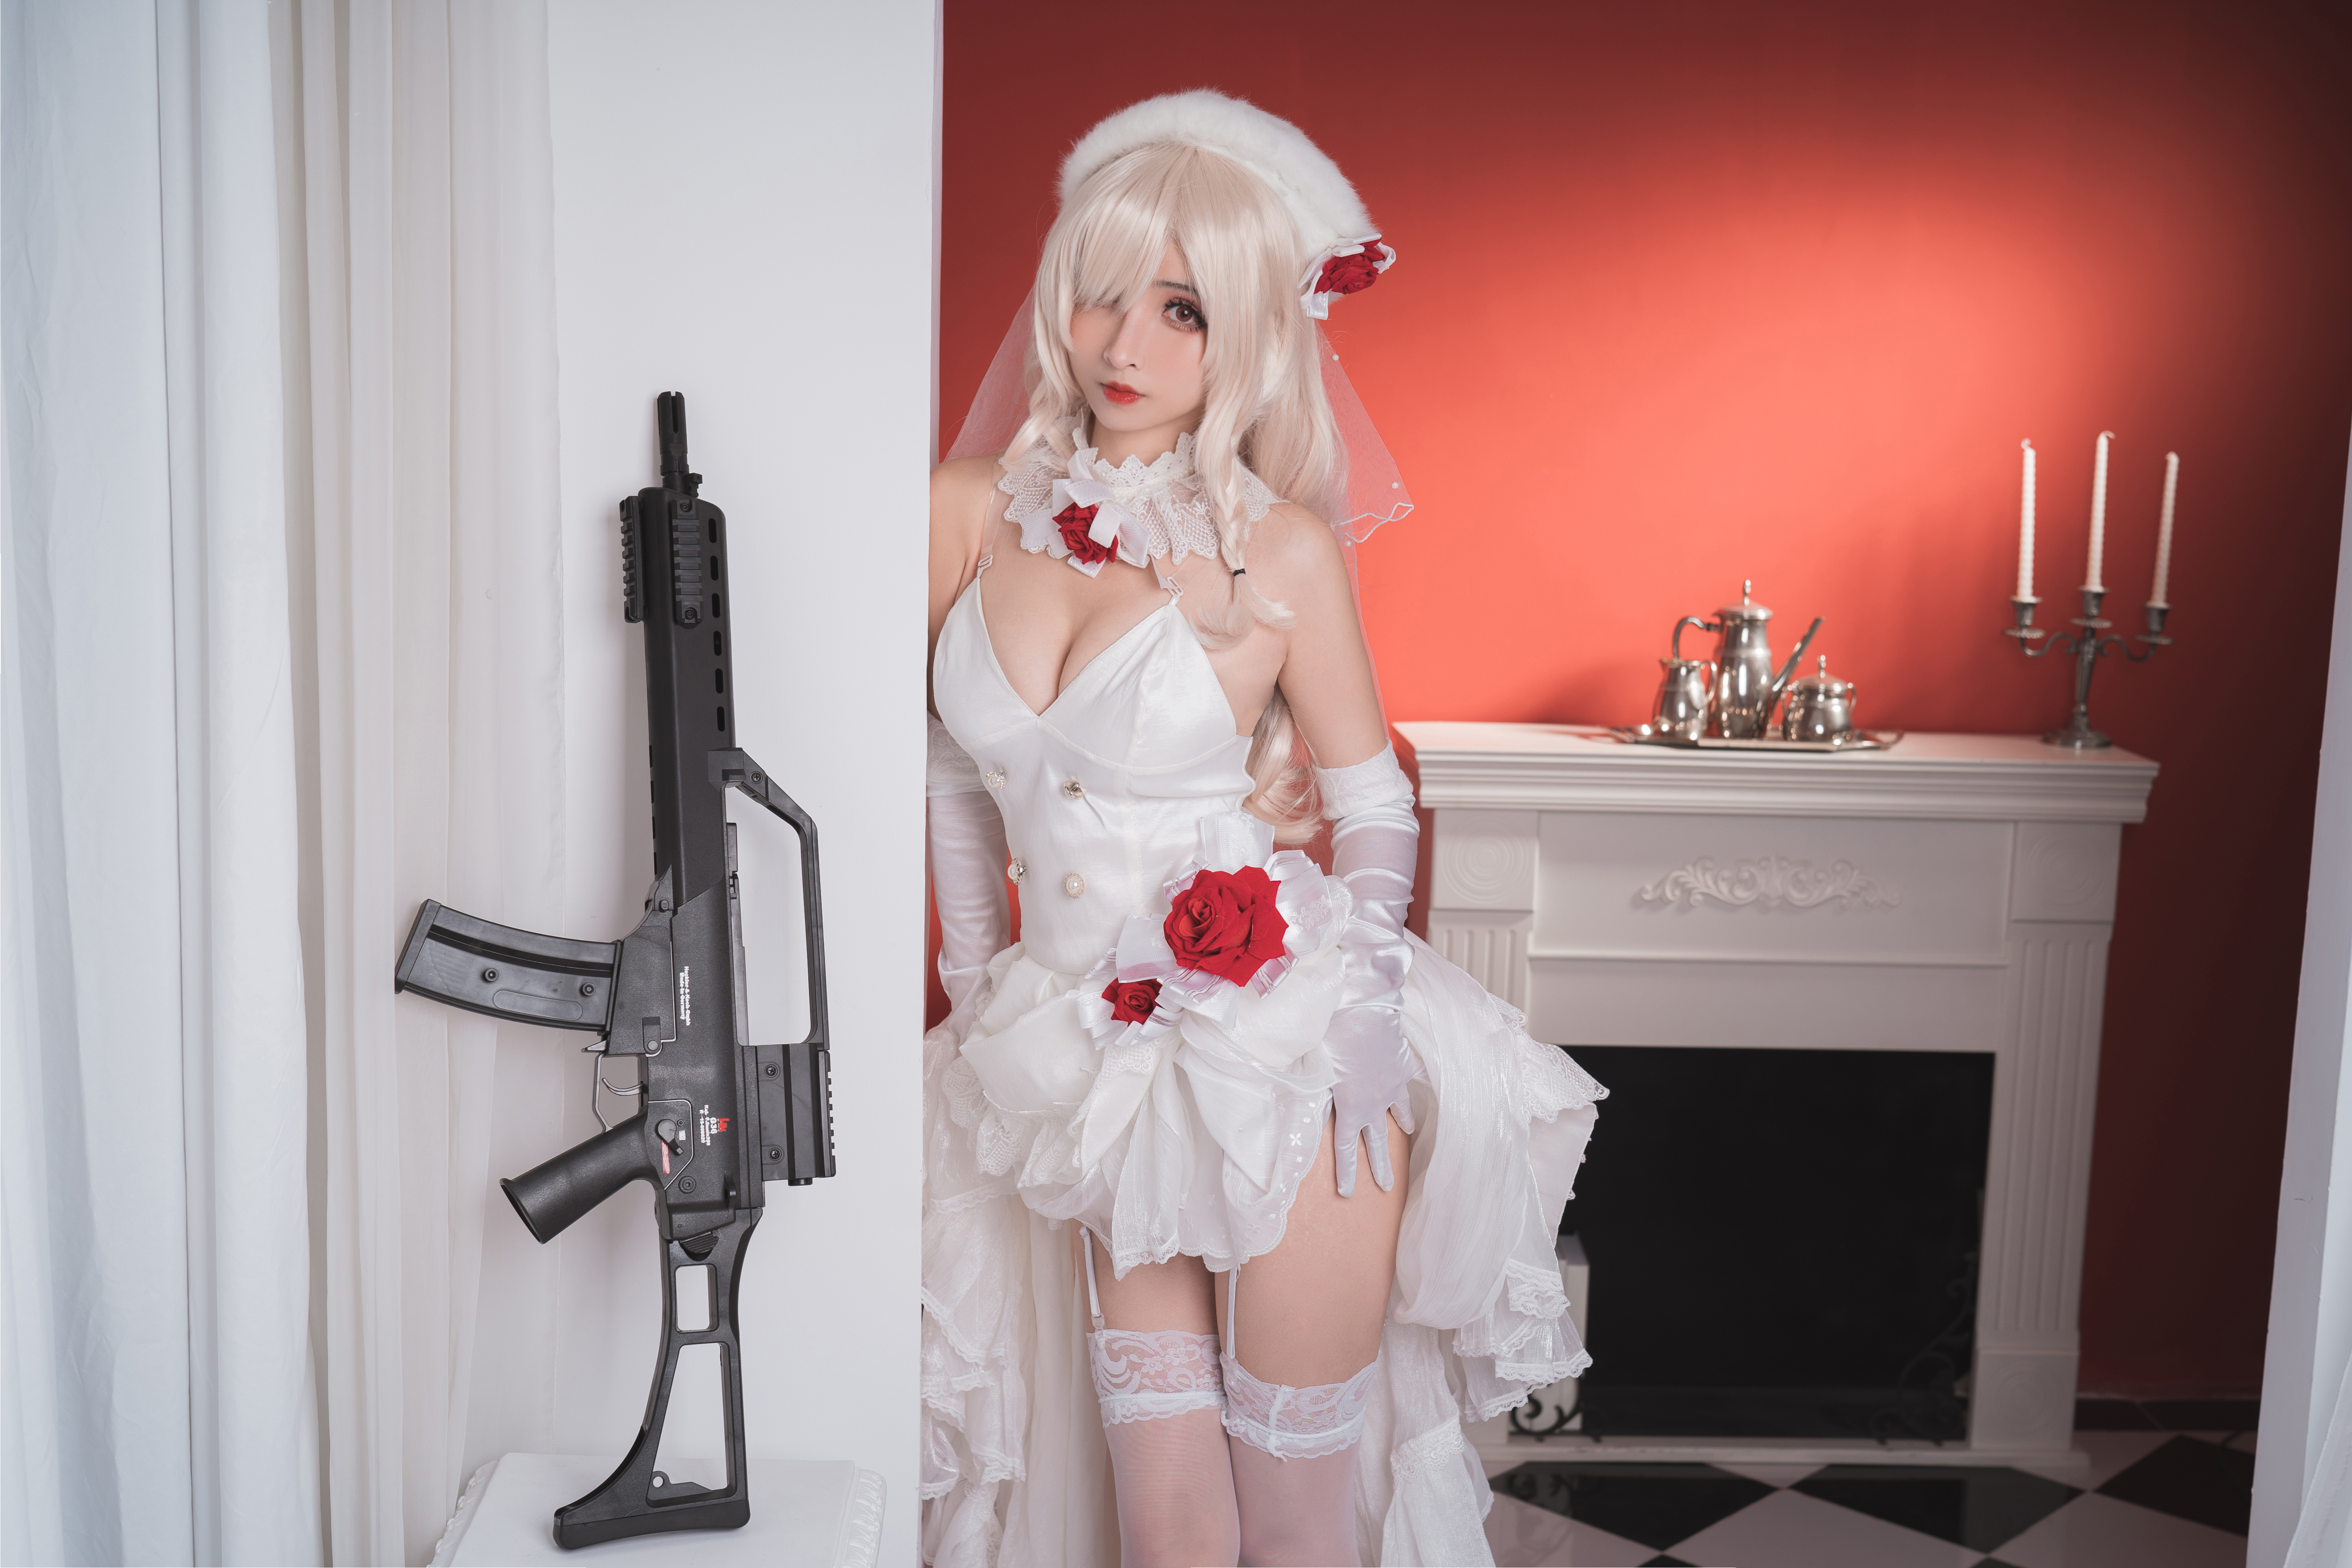 People 6000x4000 cosplay flower crown Girls Frontline G36C (Girls Frontline) girls with guns gun machine gun weapon boobs women indoors indoors hair over one eye looking at viewer dress white dress stockings makeup red lipstick hat women with hats gloves white stockings thigh-highs women Asian Rioko Cosplay